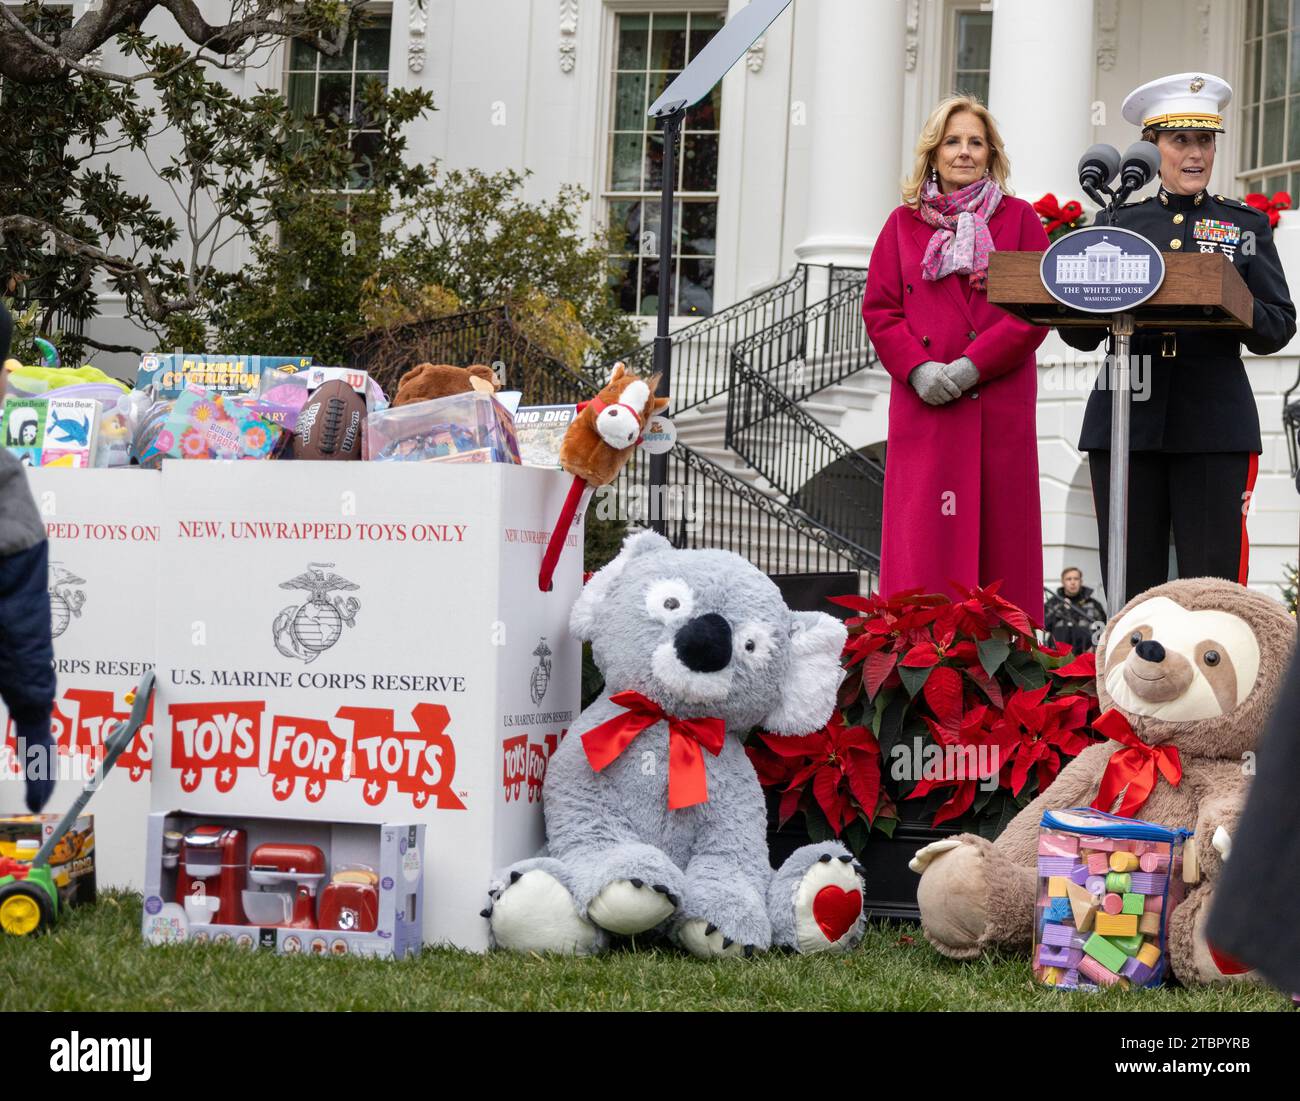 Washington, United States. 06th Dec, 2023. U.S. First Lady Jill Biden, left, looks on as U.S. Marine Corps Brig. Gen. Valerie Jackson, right, commanding general of 4th Marine Logistics Group, Marine Forces Reserve delivers remarks during a Toys for Tots event hosted at the White House, December 6, 2023 in Washington, DC Each year, the Marine Corps collects and distributes 8 million toys for children in 830 communities nationwide. Credit: Cpl. Ryan Schmid/U.S Marine Corps Photo/Alamy Live News Stock Photo